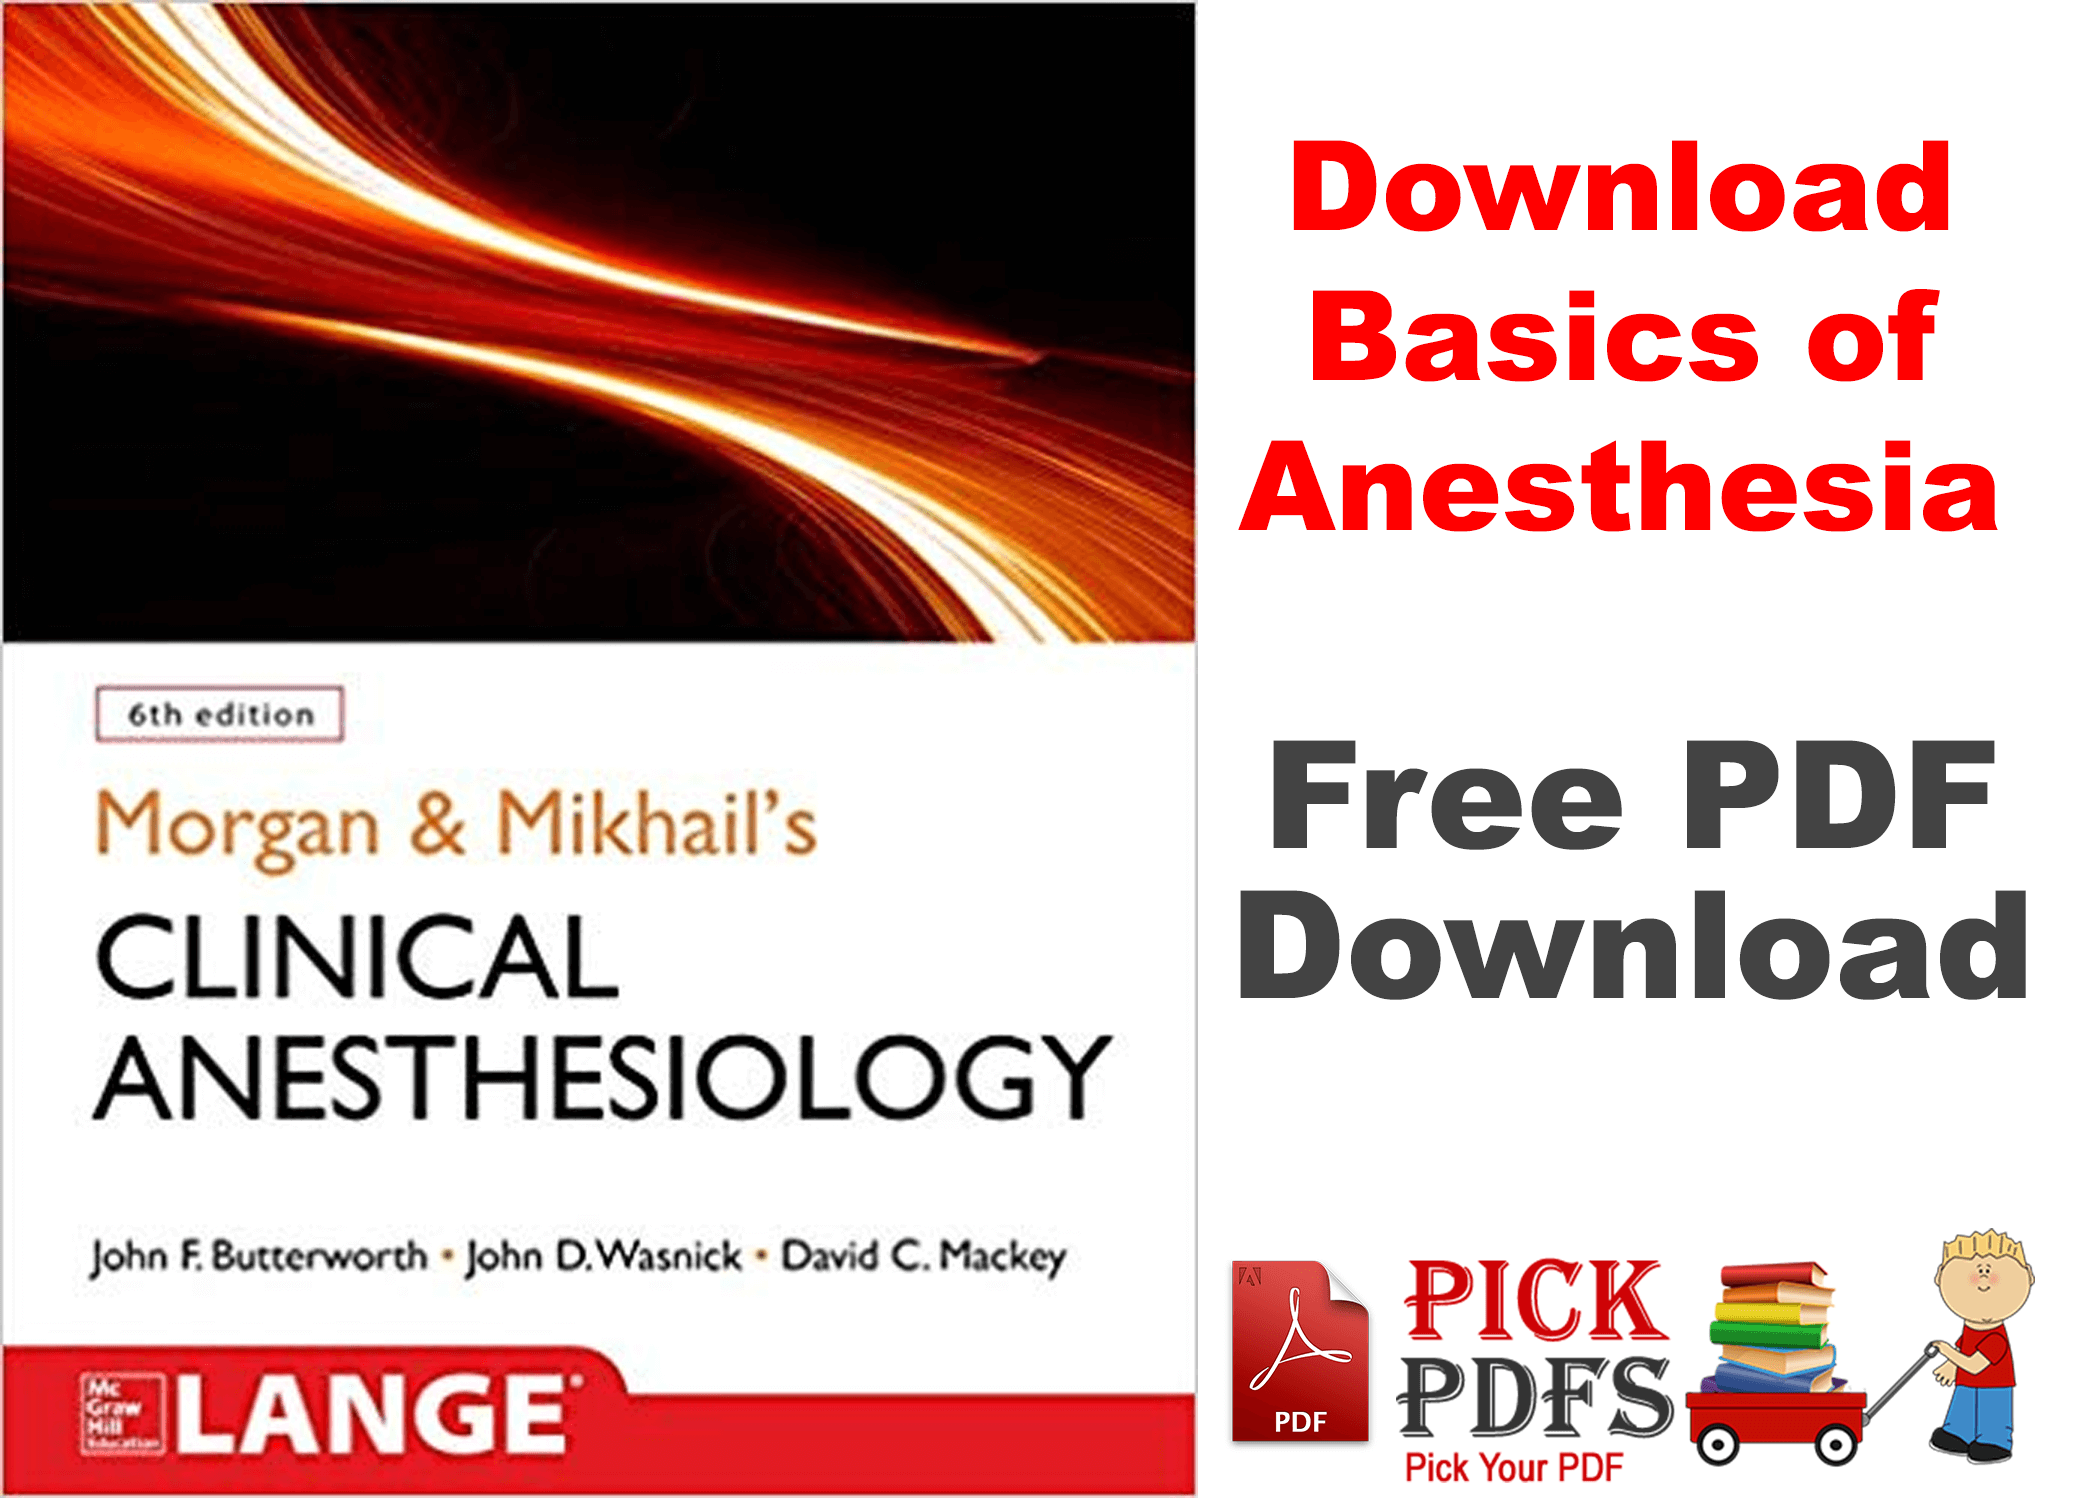 https://pickpdfs.com/anesthesiology-core-review-part-1-pdf-basic-exam-free-pdf-download-direct-link/